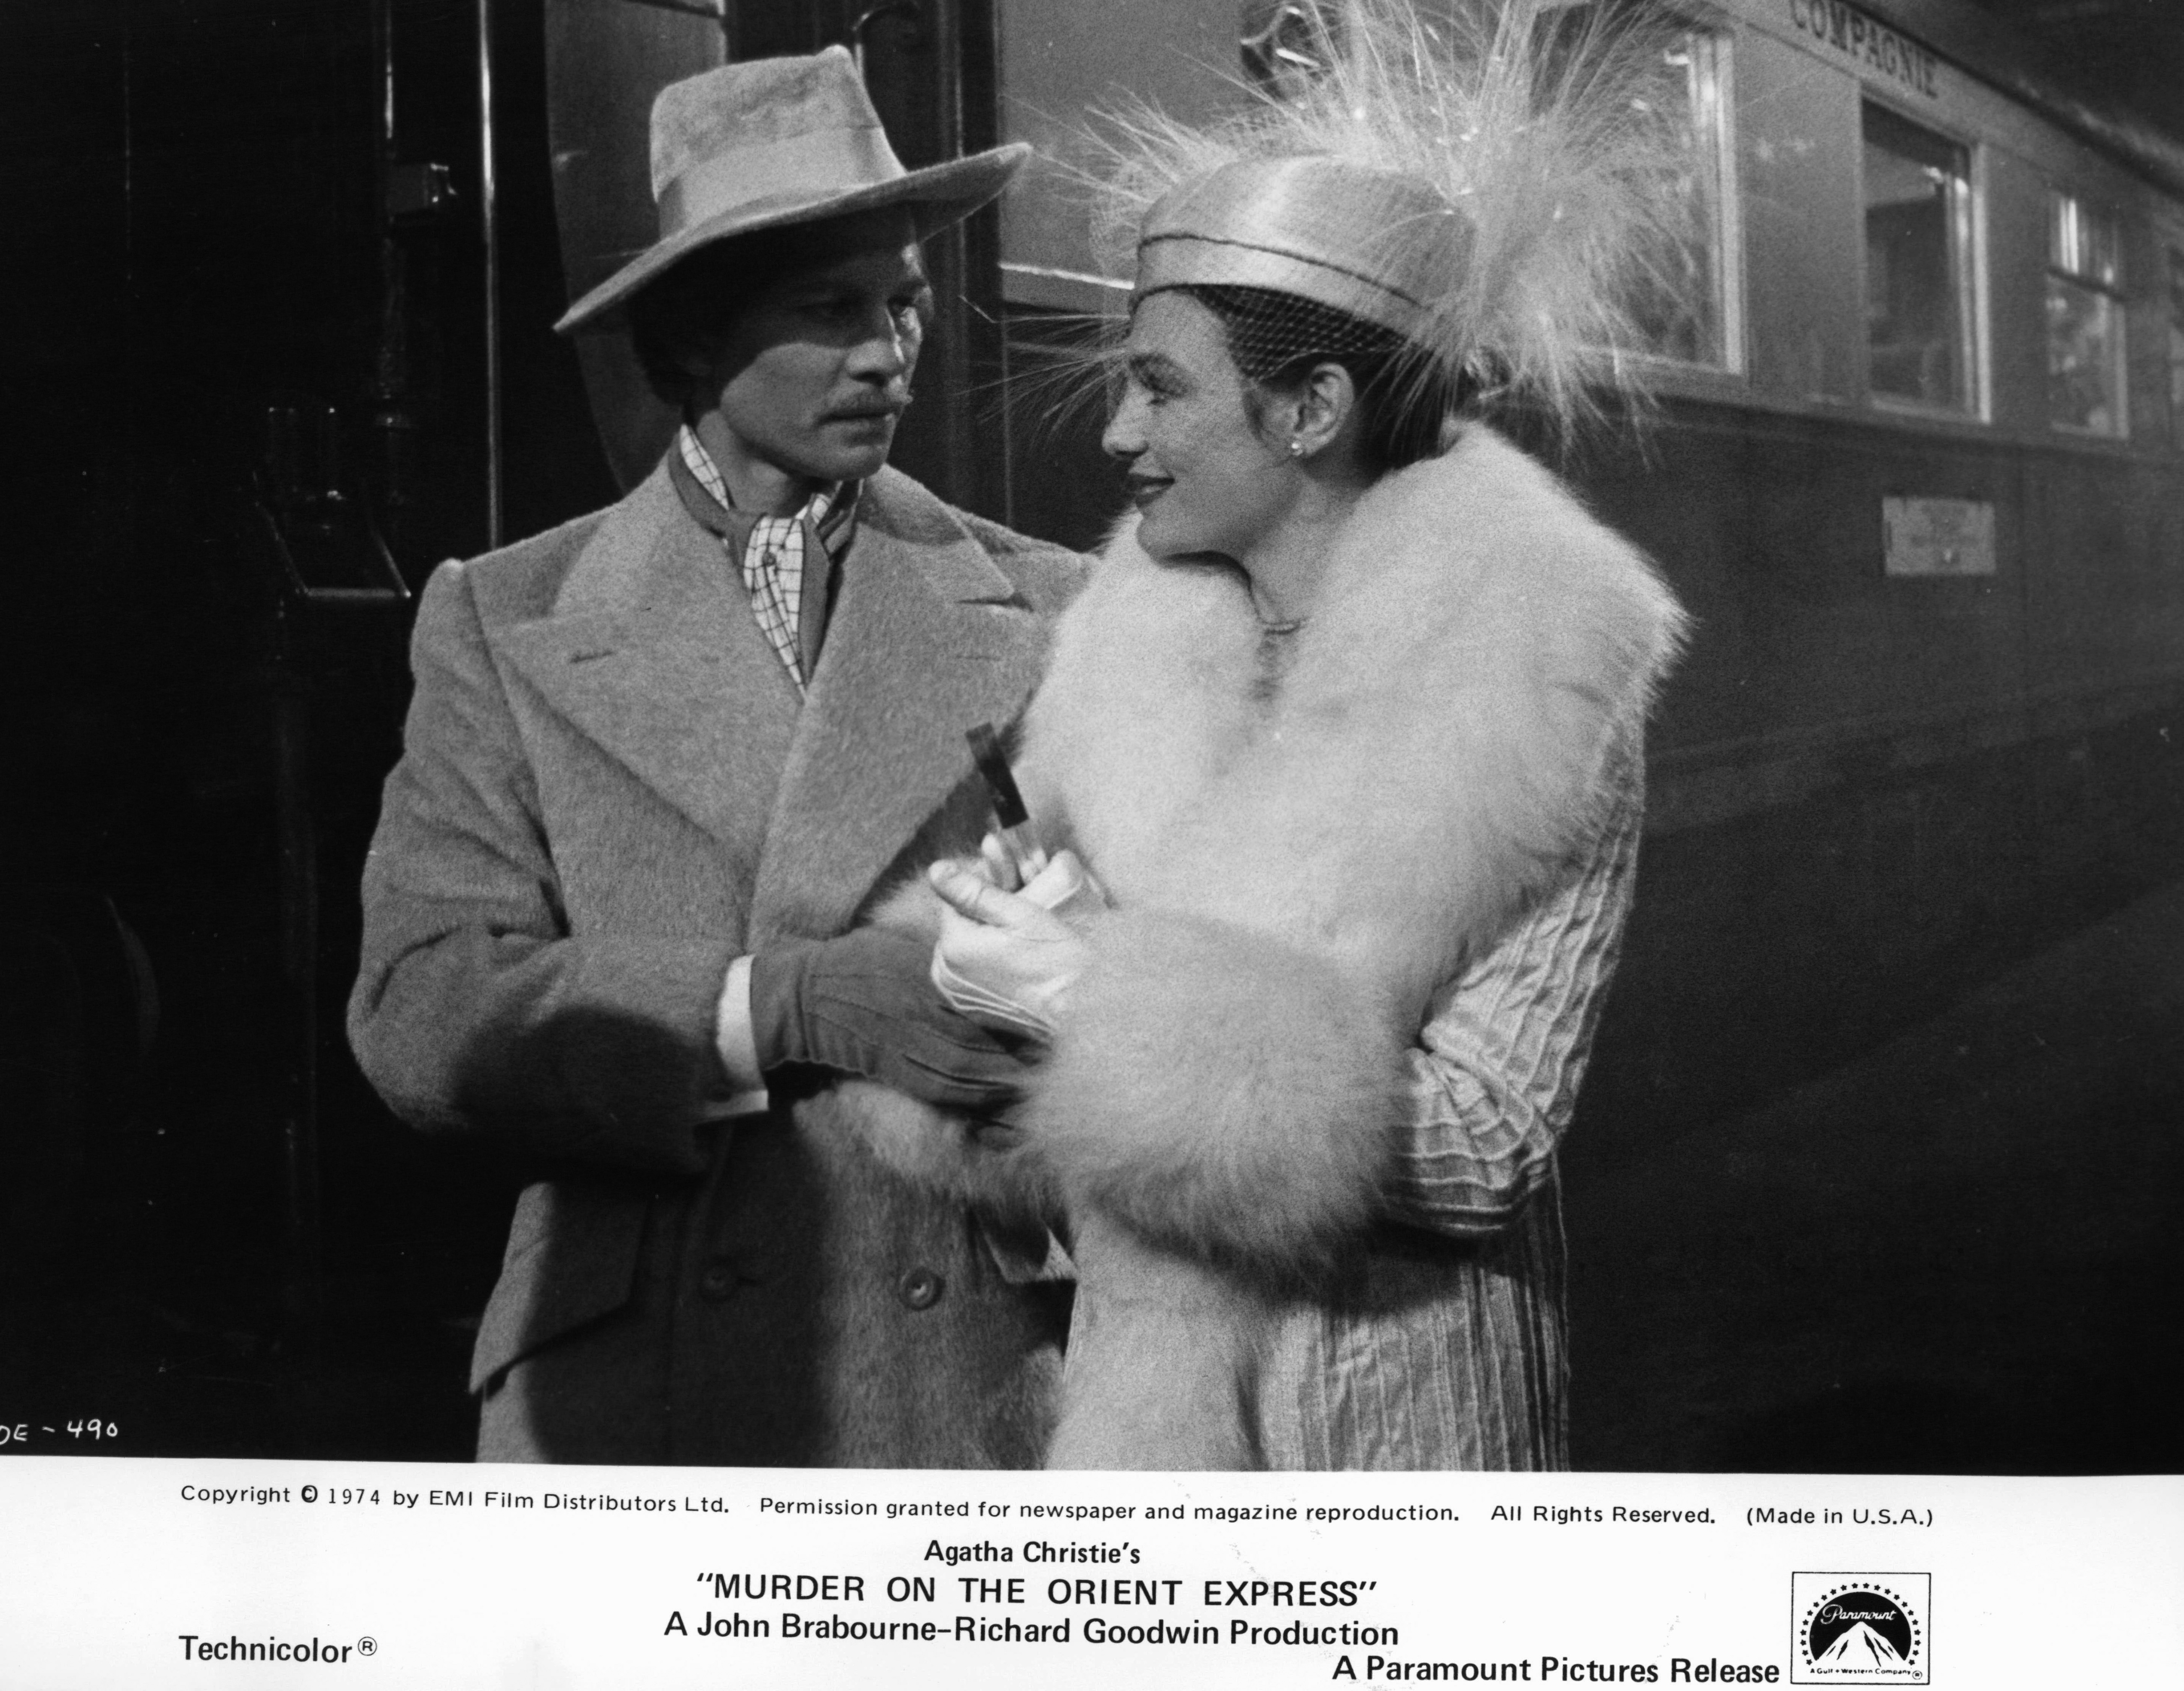 Still of Jacqueline Bisset and Michael York in Murder on the Orient Express (1974)